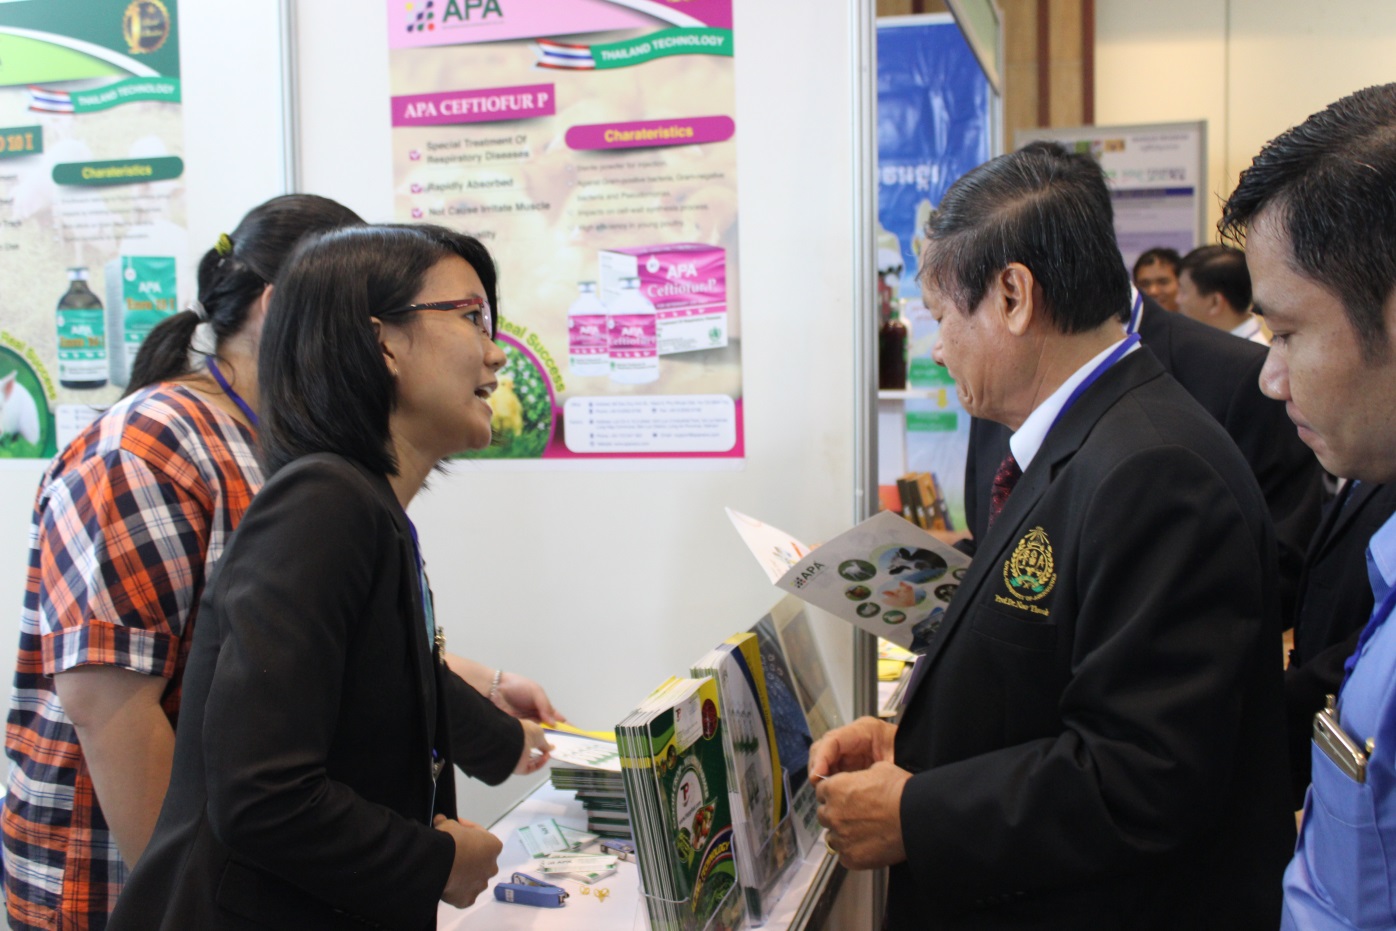 Mr. H.E NaoThouk – Representative of Ministry of Agriculture Forestry and Fisheries of Cambodia asking about products of APA.